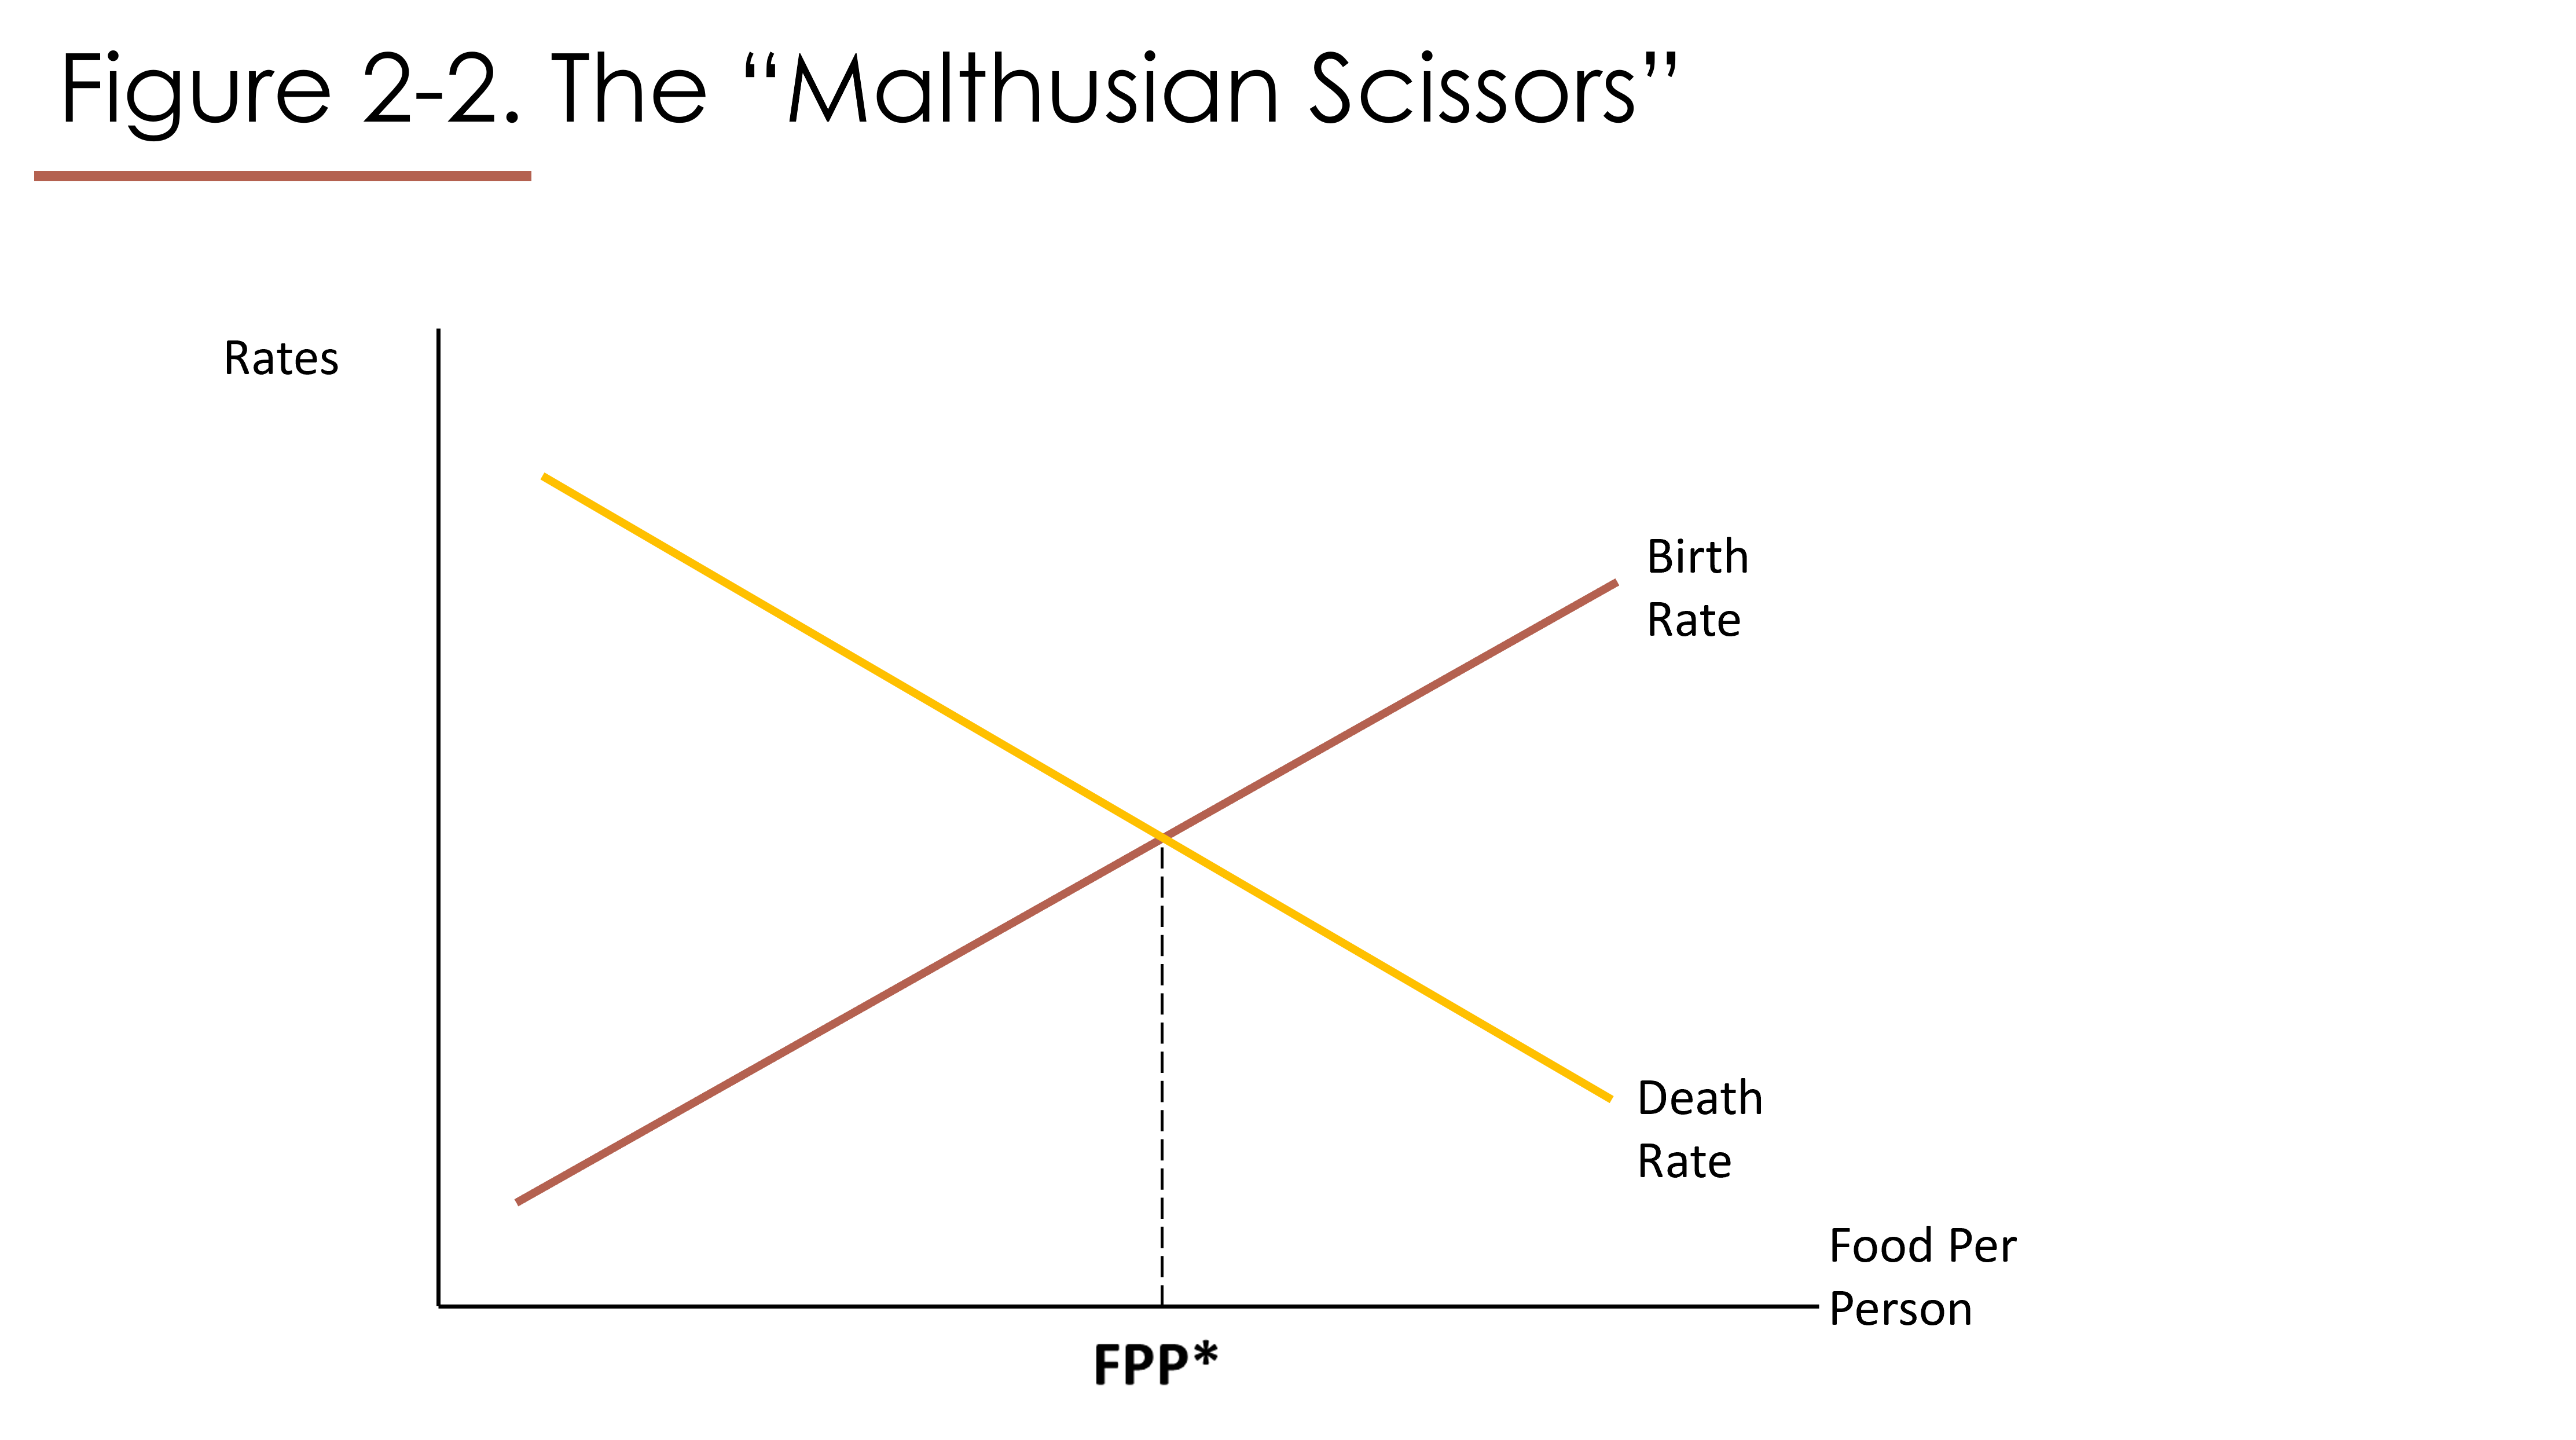 This graph has Food Per Person on the horizontal axis. It has a birth rate line sloping upwards, and a death rate line sloping downwards. The two lines cross at a level of Food Per Person equal to FPP*.